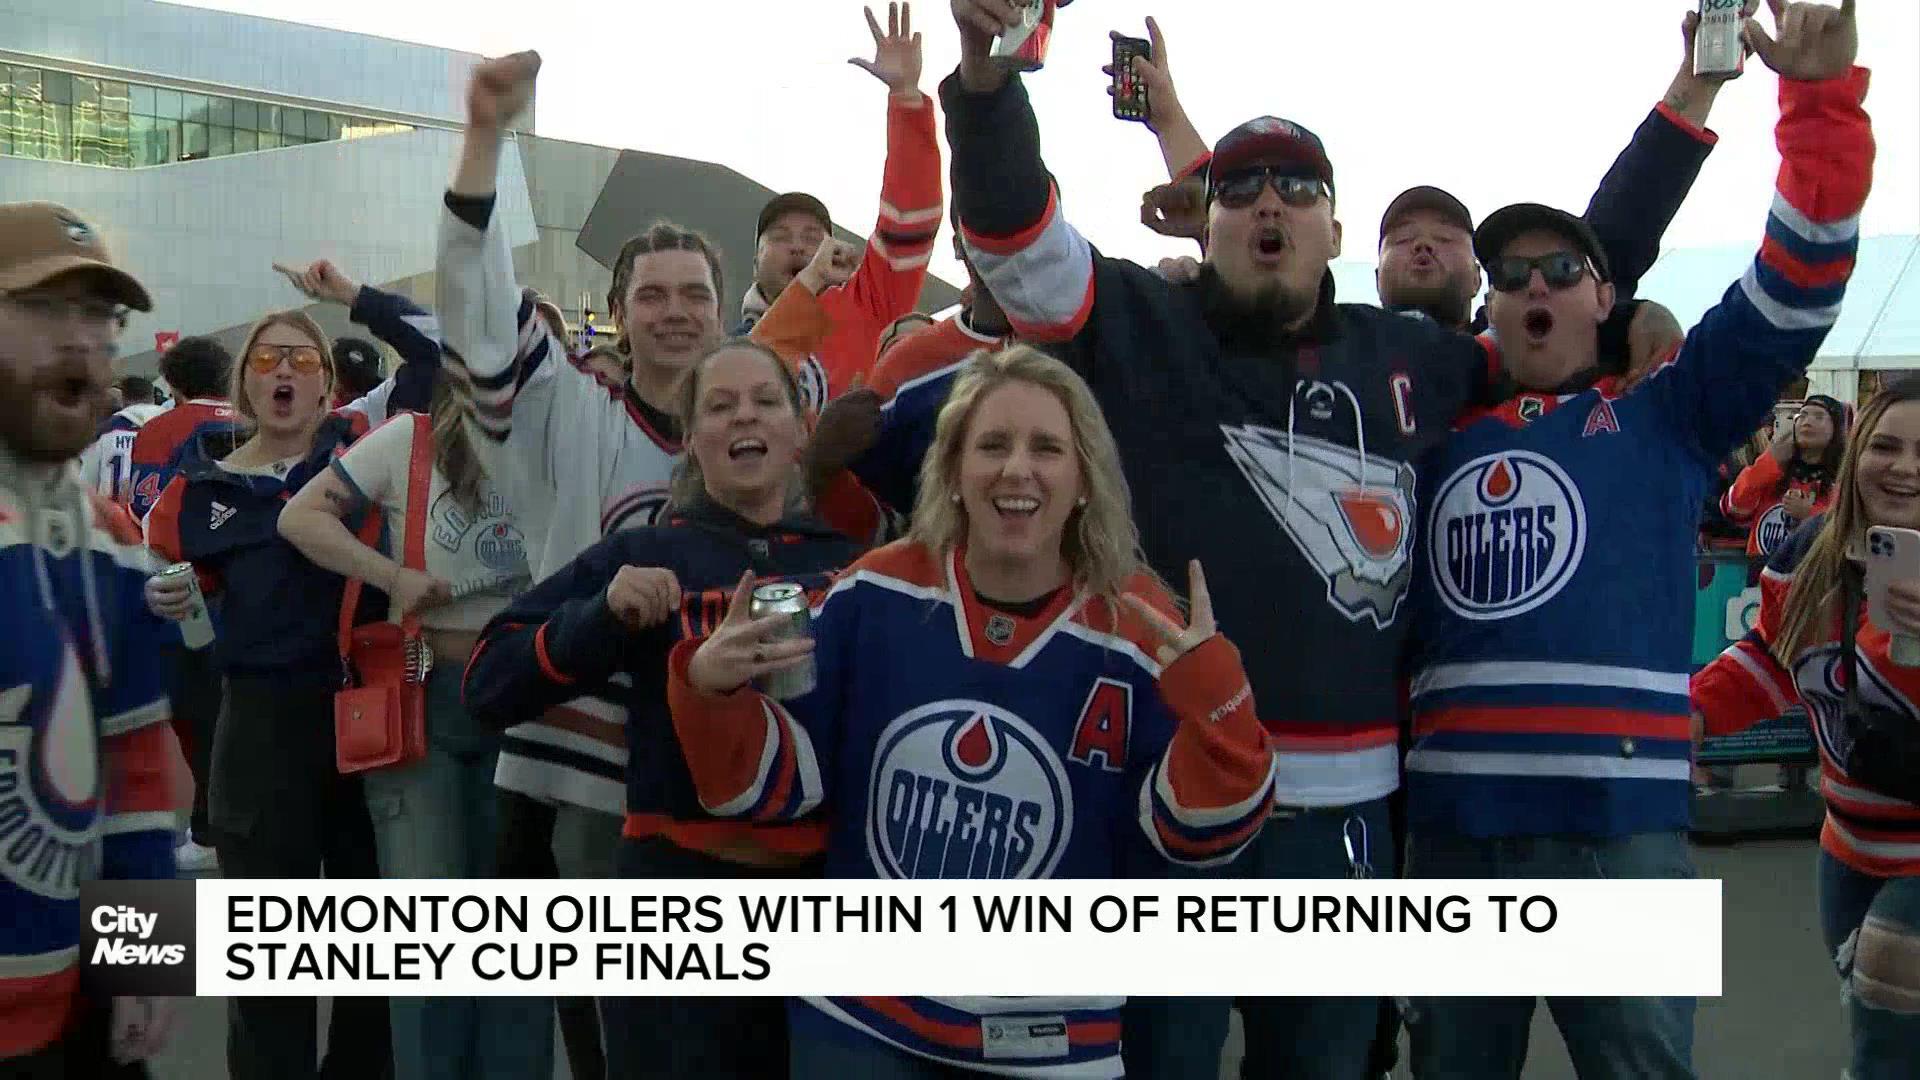 Edmonton Oilers one win away from returning to Stanley Cup Finals